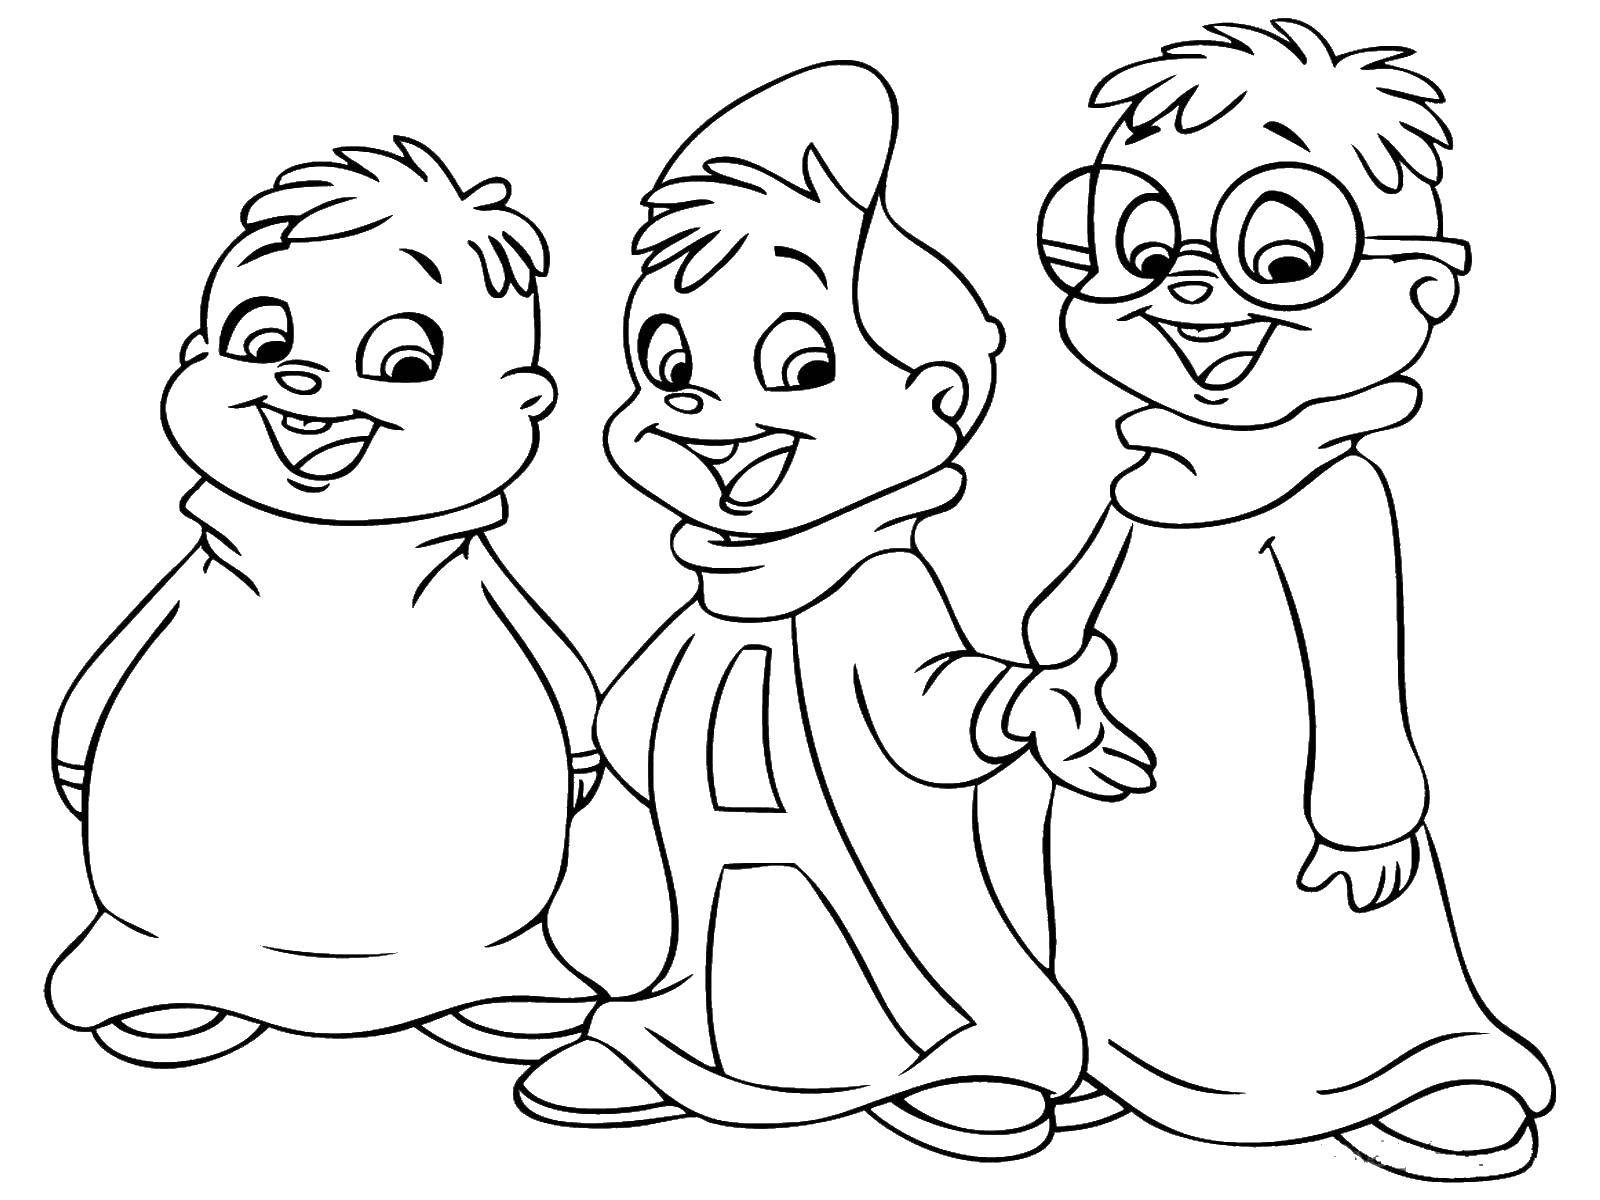 Coloring Alvin and the chipmunks. Category cartoons. Tags:  Alvin, chipmunks, glasses.